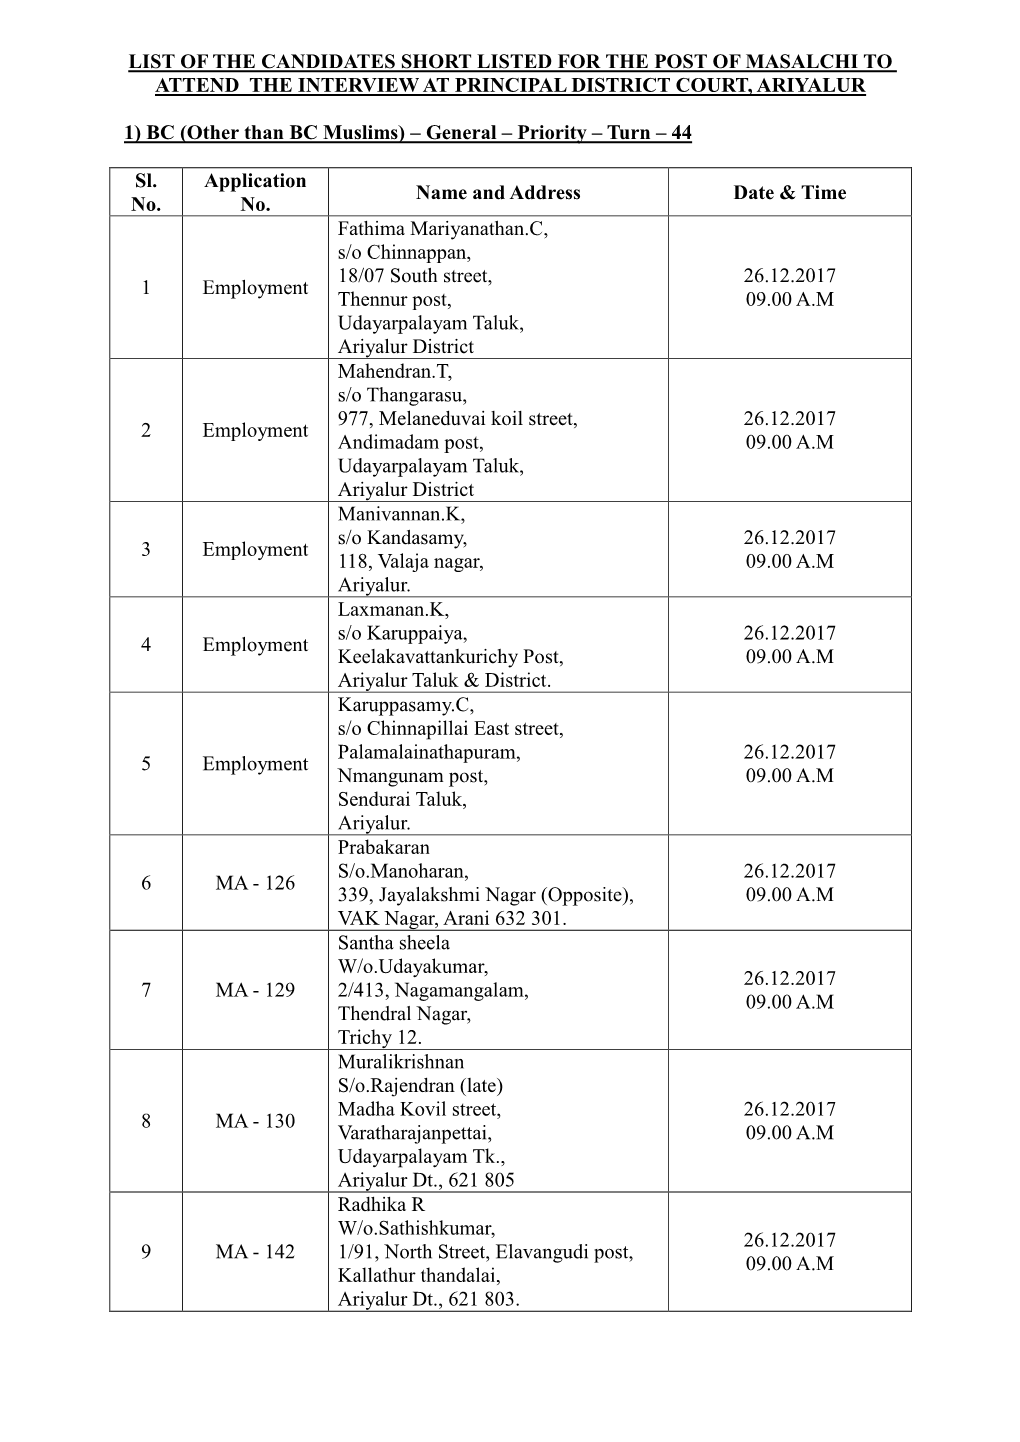 List of the Candidates Short Listed for the Post of Masalchi to Attend the Interview at Principal District Court, Ariyalur